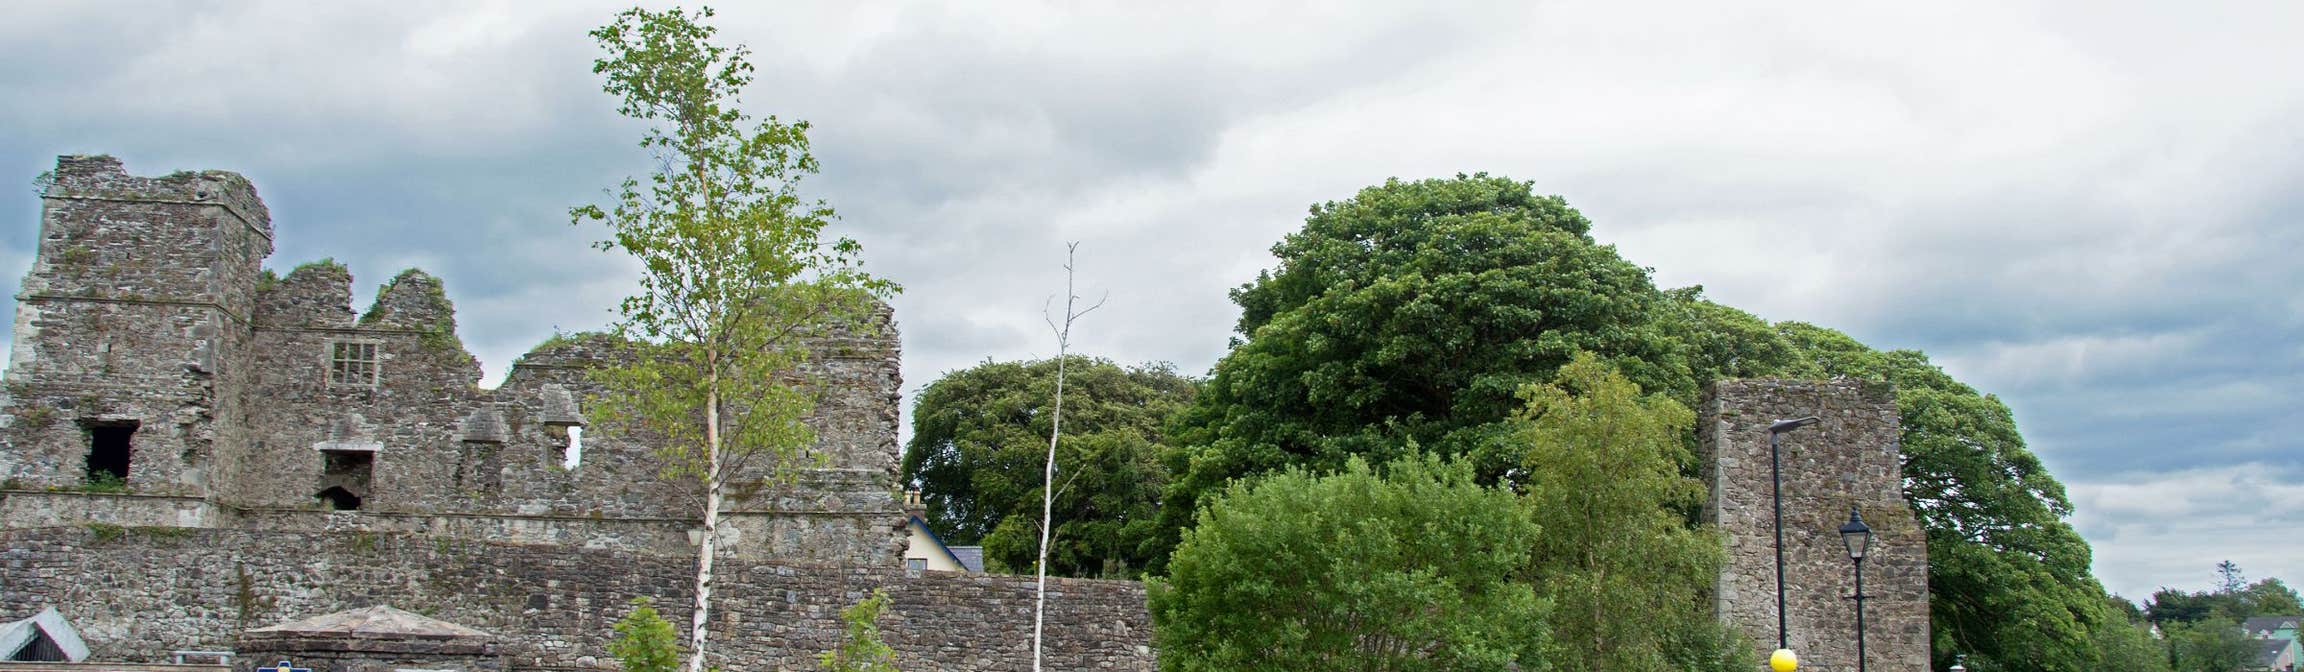 Images of ruins in Manorhamilton in County Leitrim